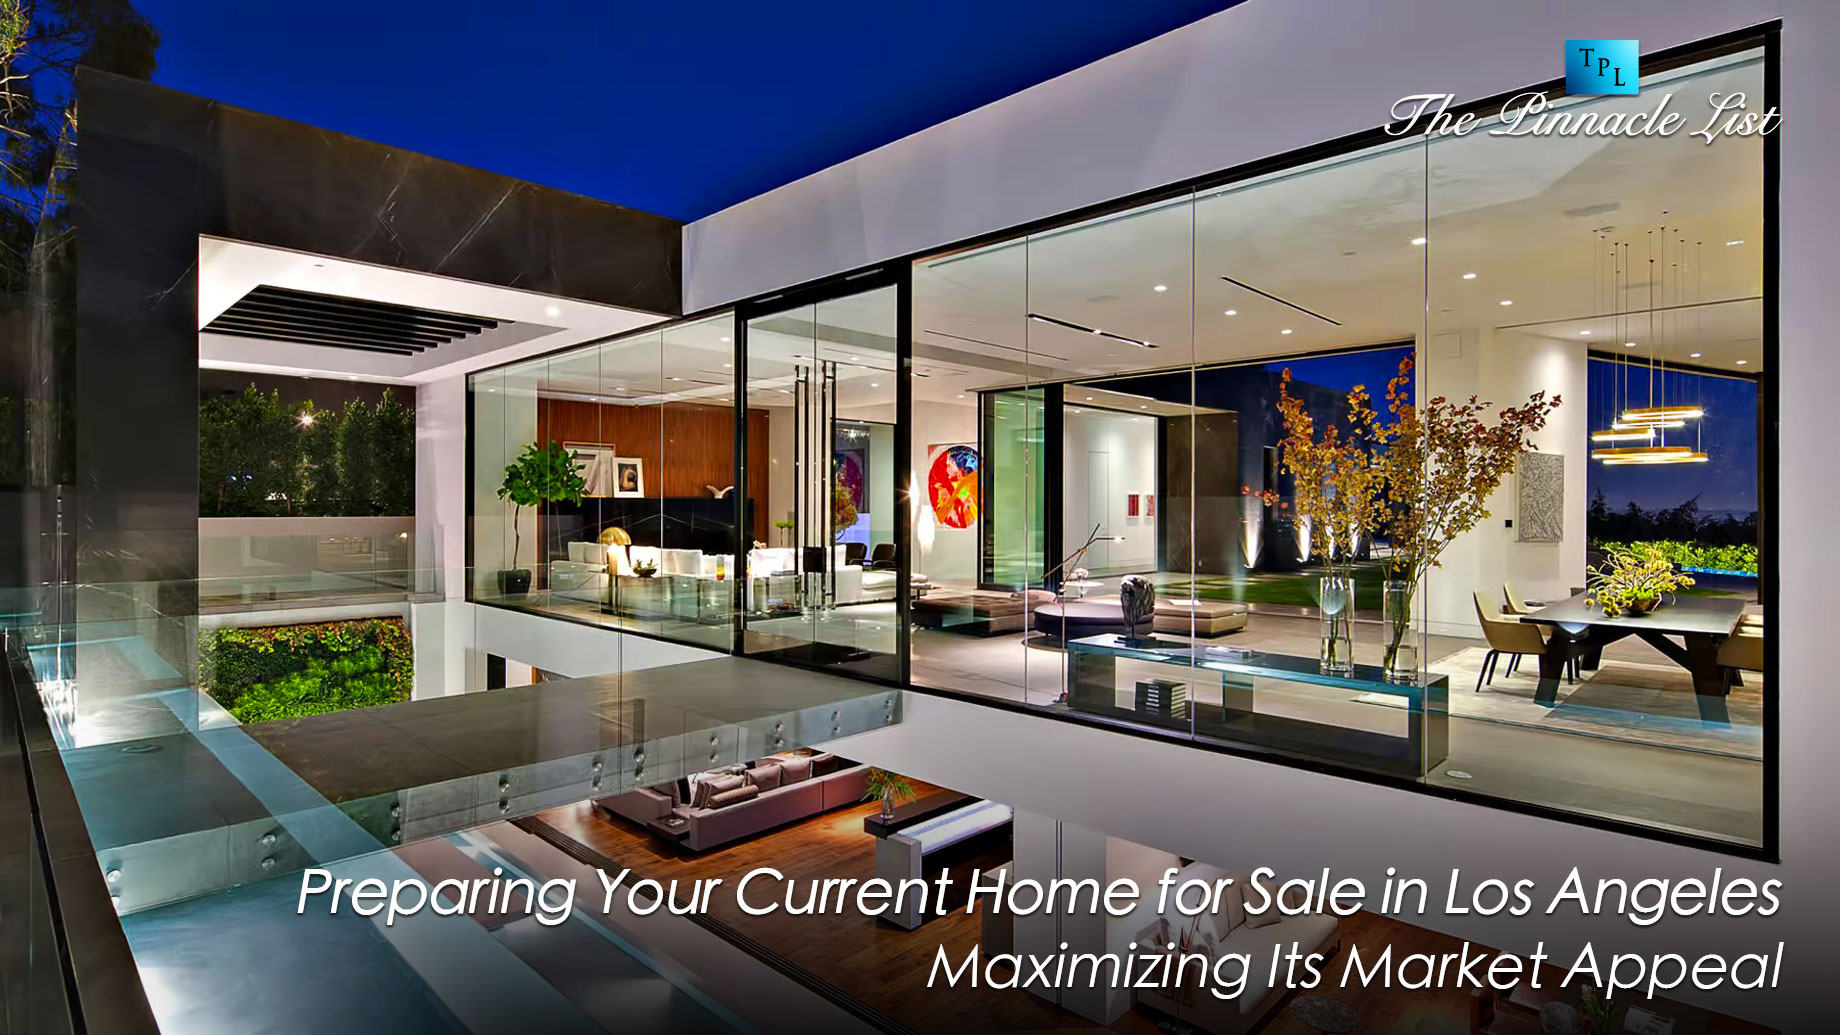 Preparing Your Current Home for Sale in Los Angeles: Maximizing Its Market Appeal